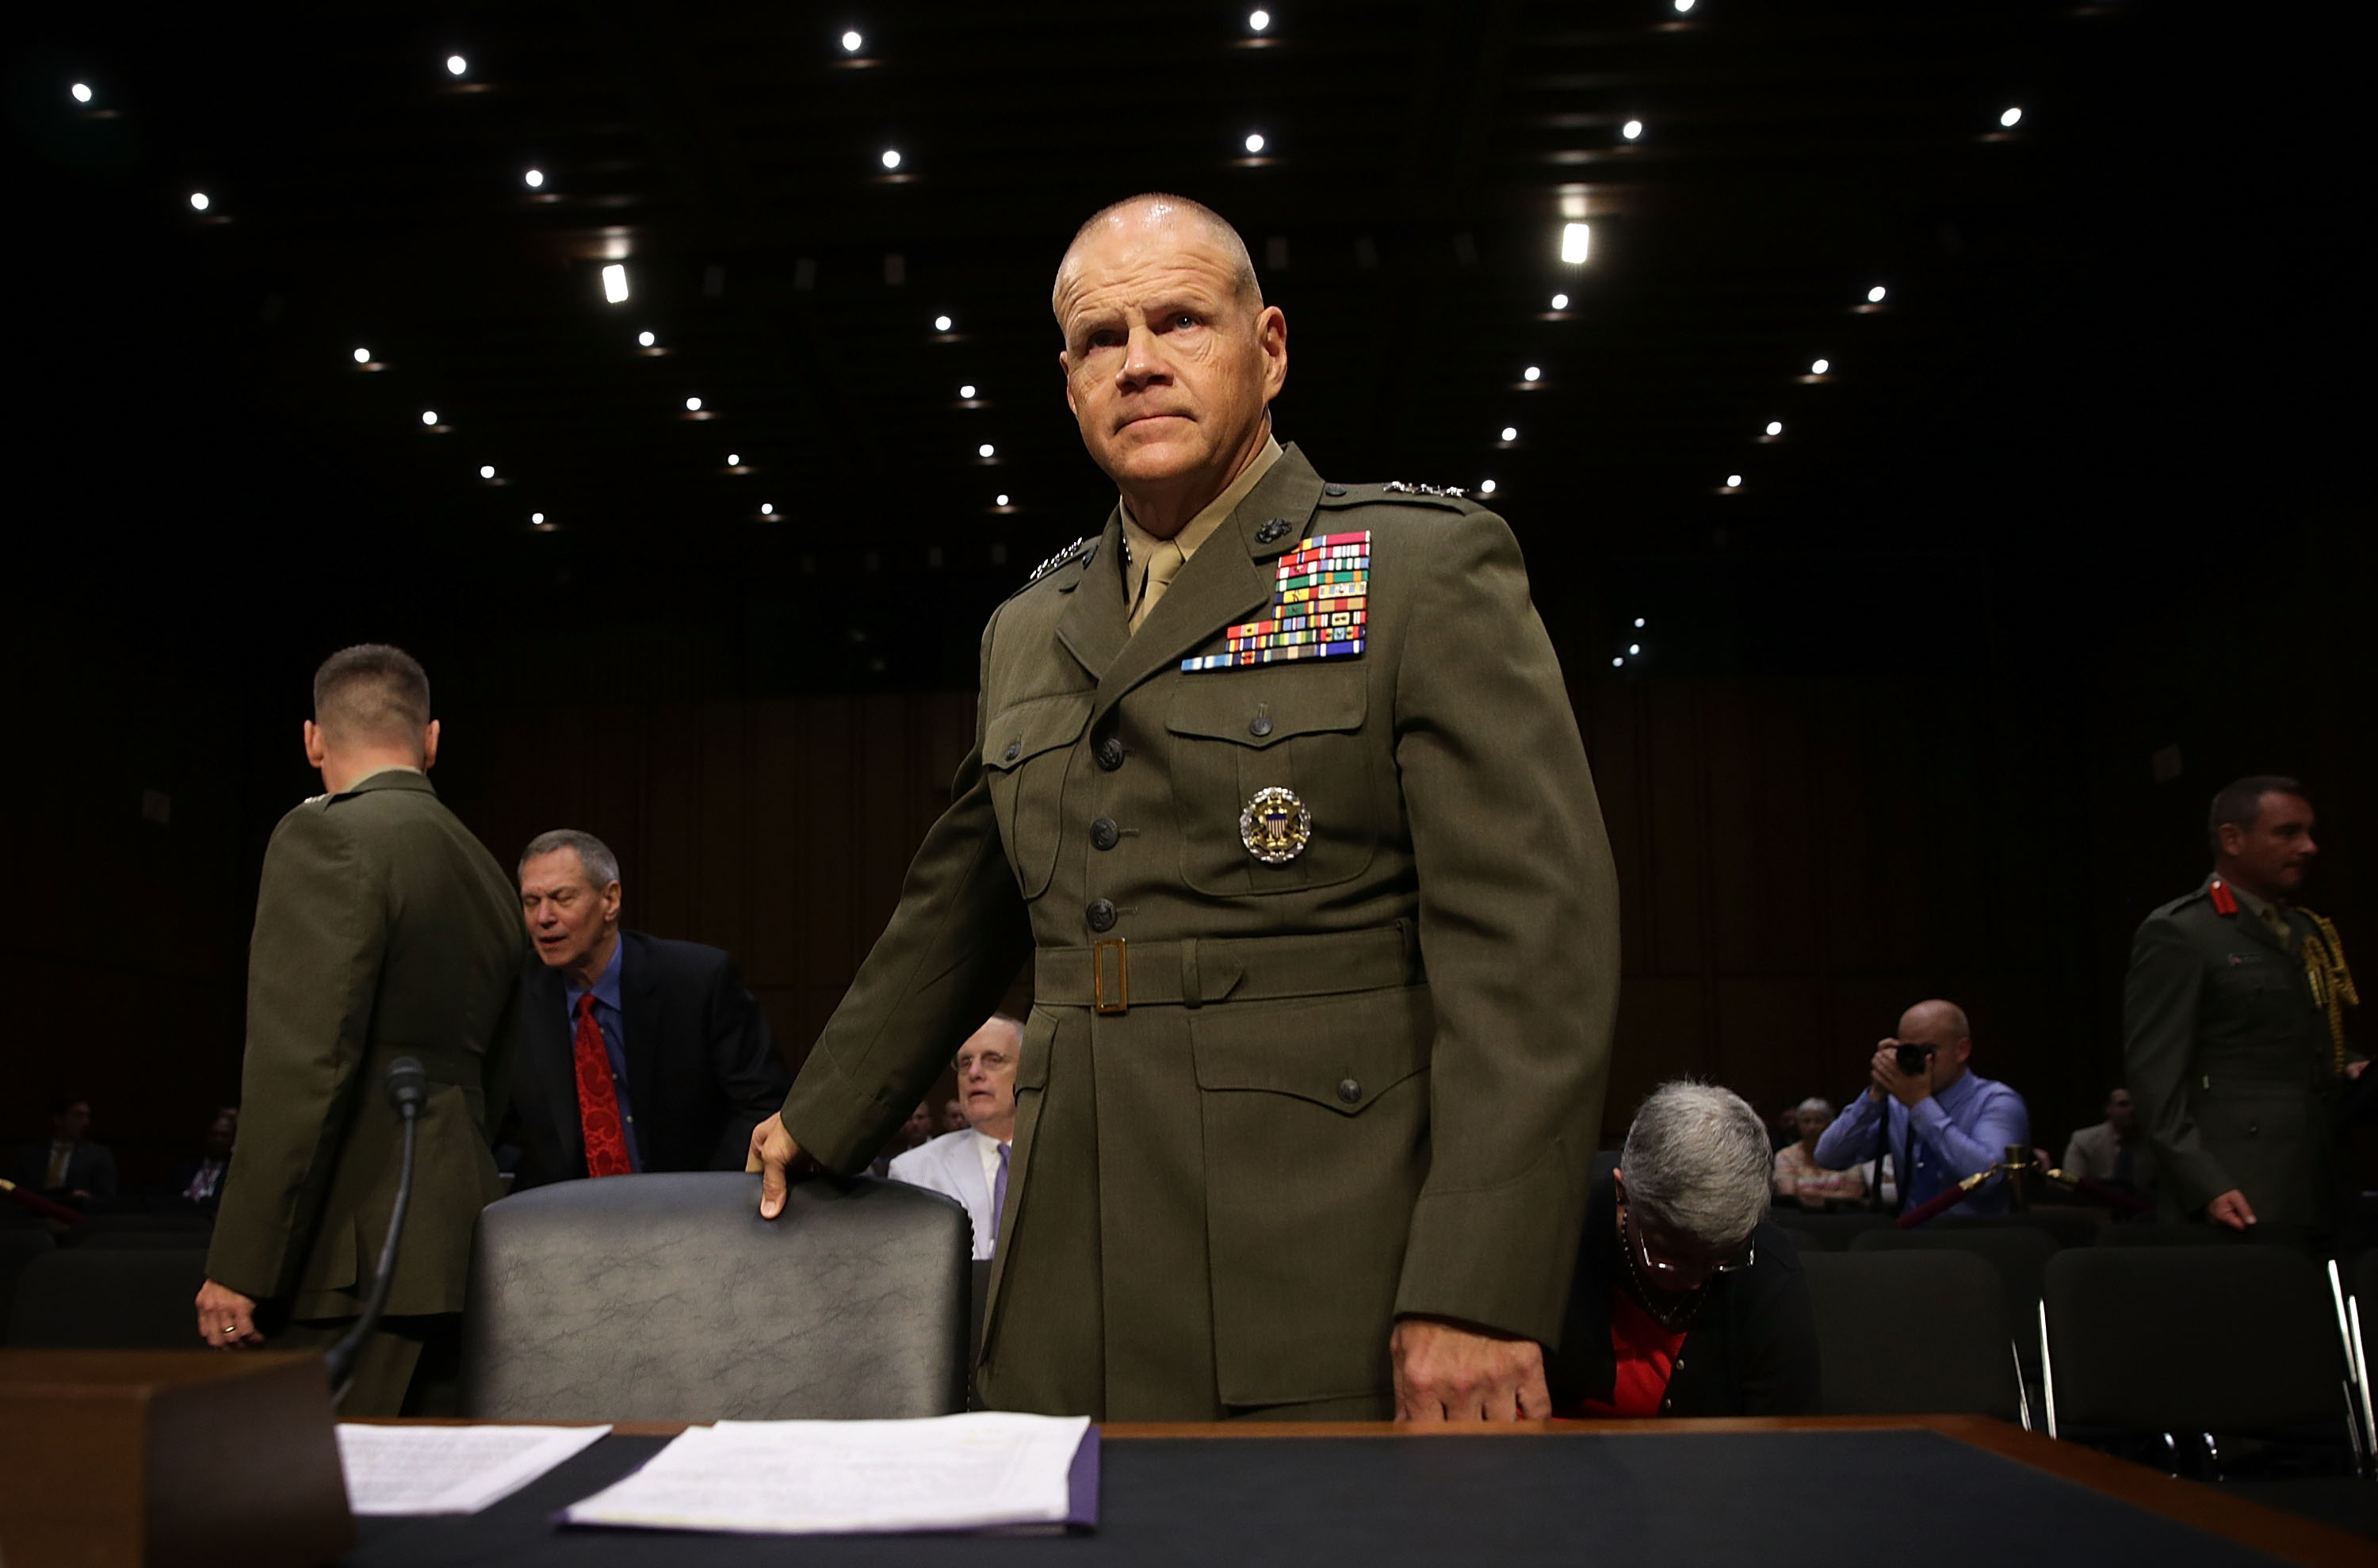 Lt. Gen. Robert Neller takes his seat during his confirmation hearing before the Senate Armed Services Committee on July 23, 2015 on Capitol Hill in Washington, D.C. (Alex Wong/Getty Images)